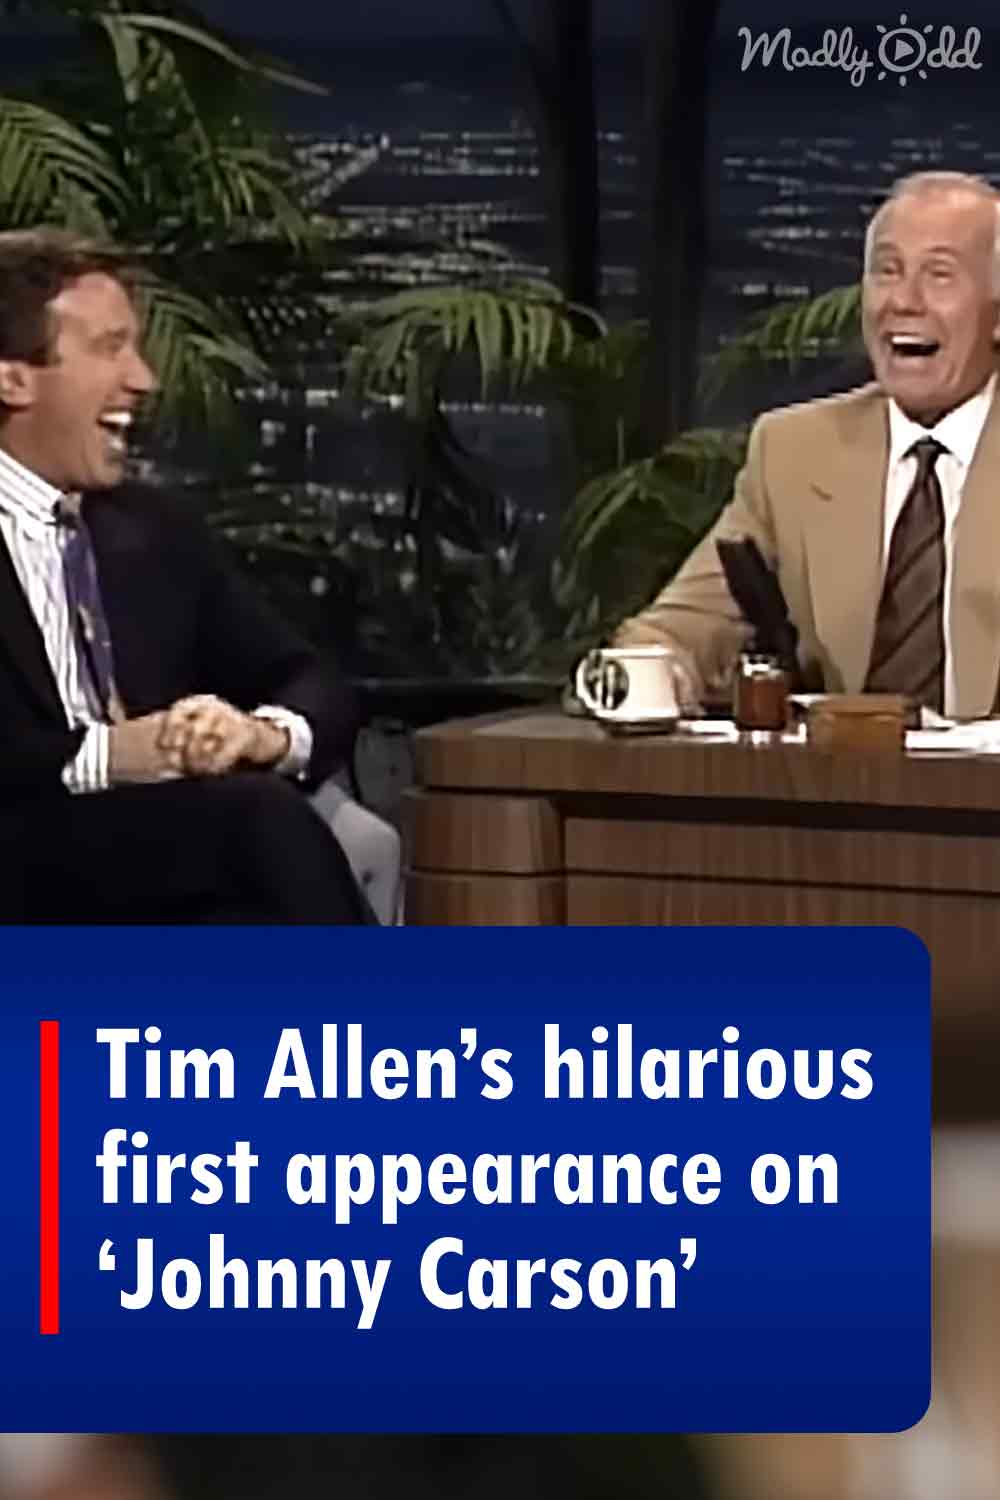 Tim Allen’s hilarious first appearance on ‘Johnny Carson’